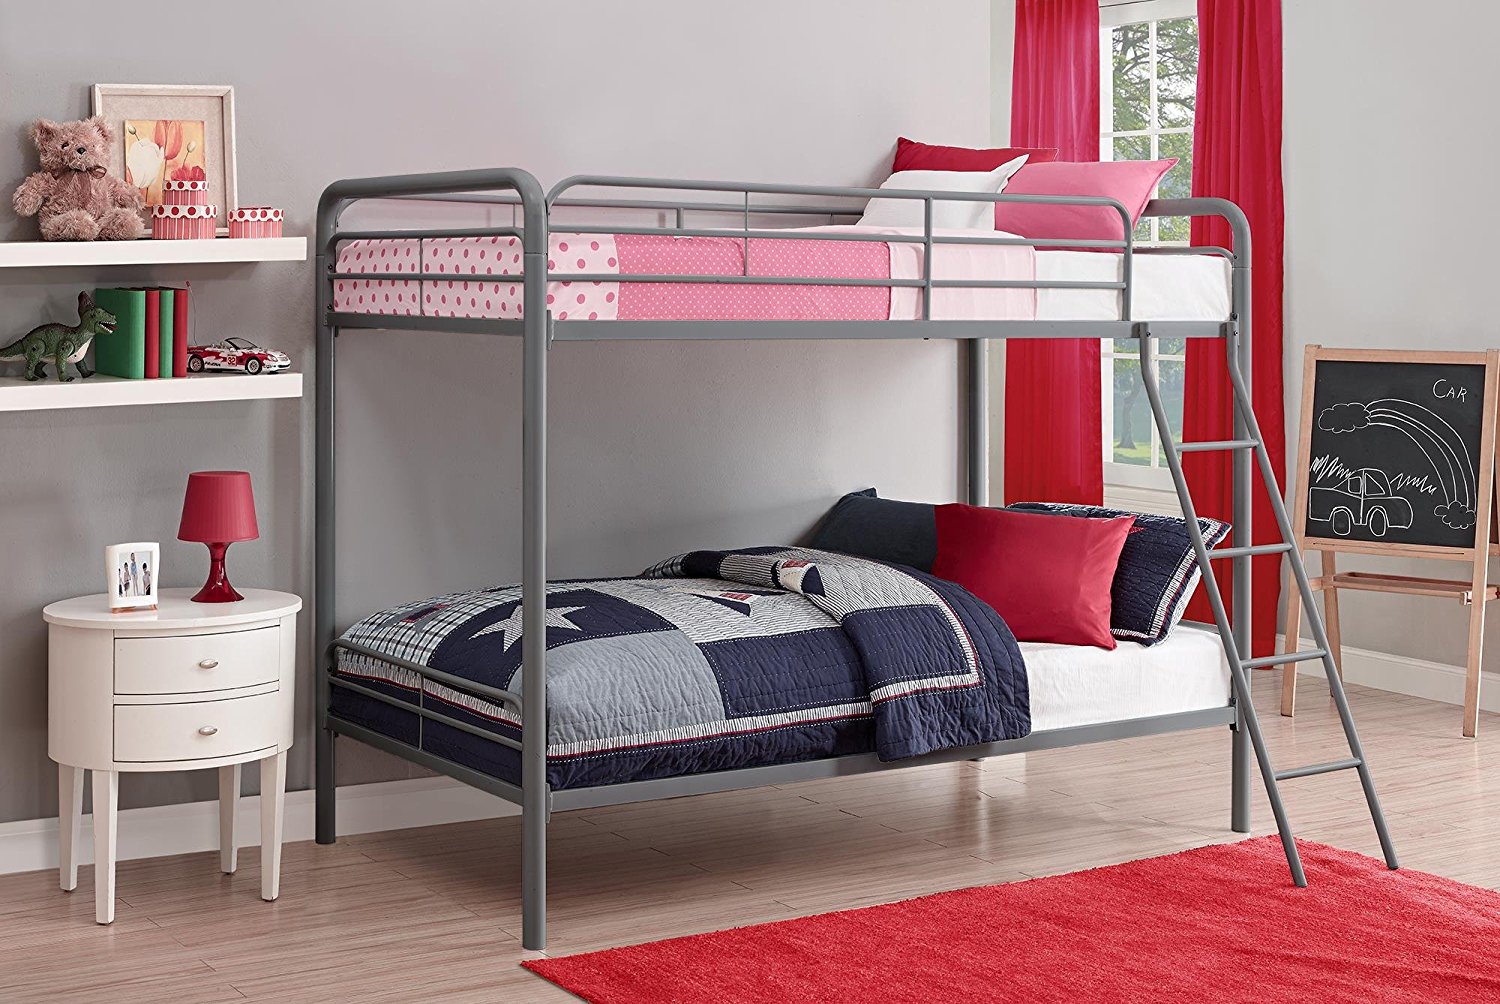 DPH twin over twin bunk bed for $133, free shipping